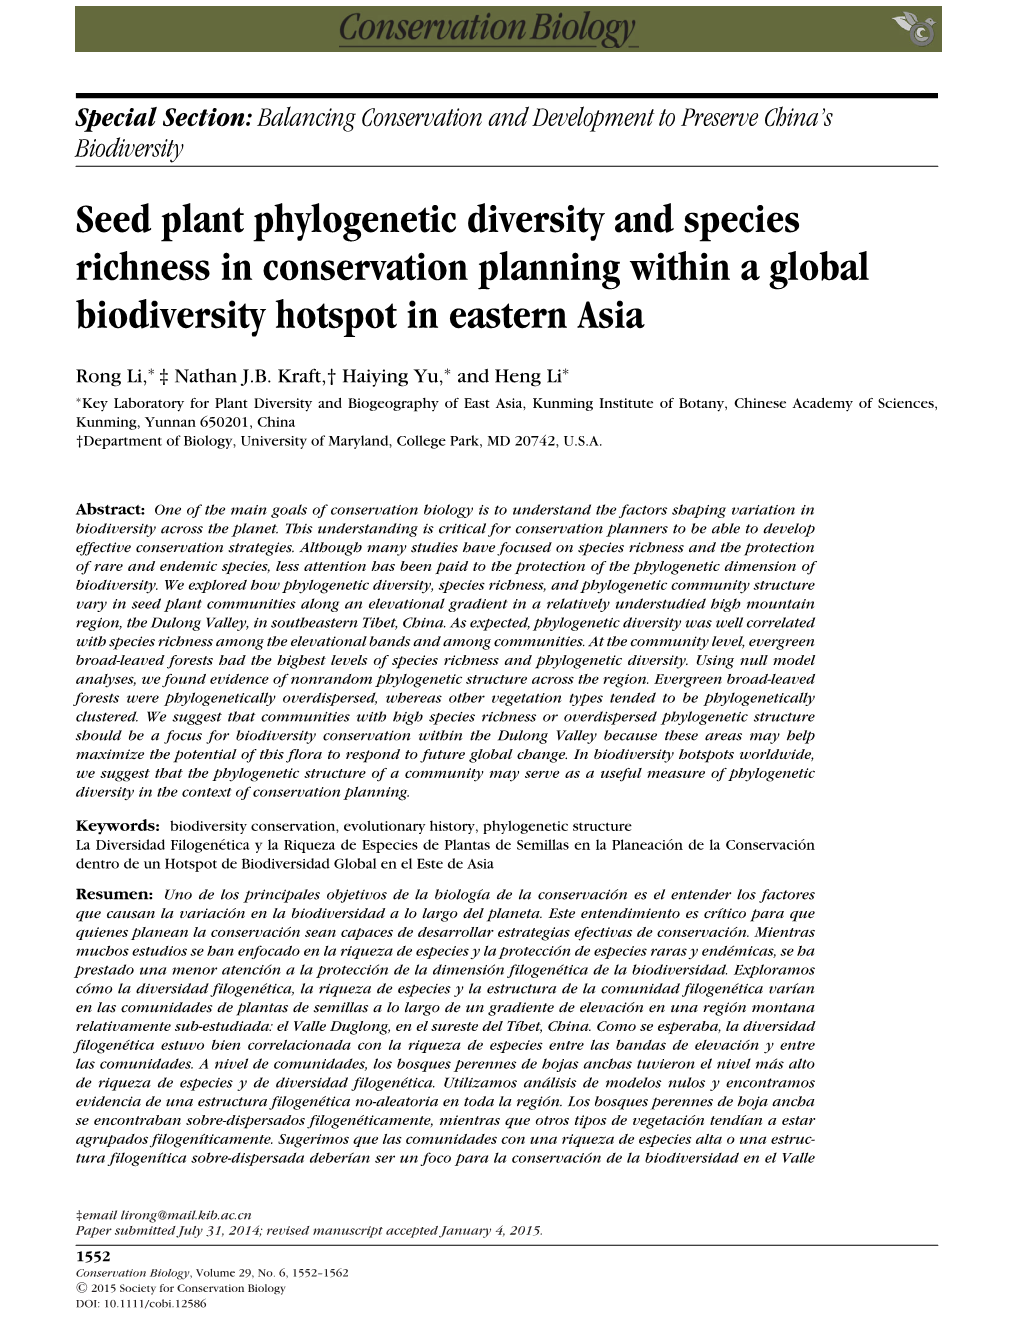 Seed Plant Phylogenetic Diversity and Species Richness in Conservation Planning Within a Global Biodiversity Hotspot in Eastern Asia